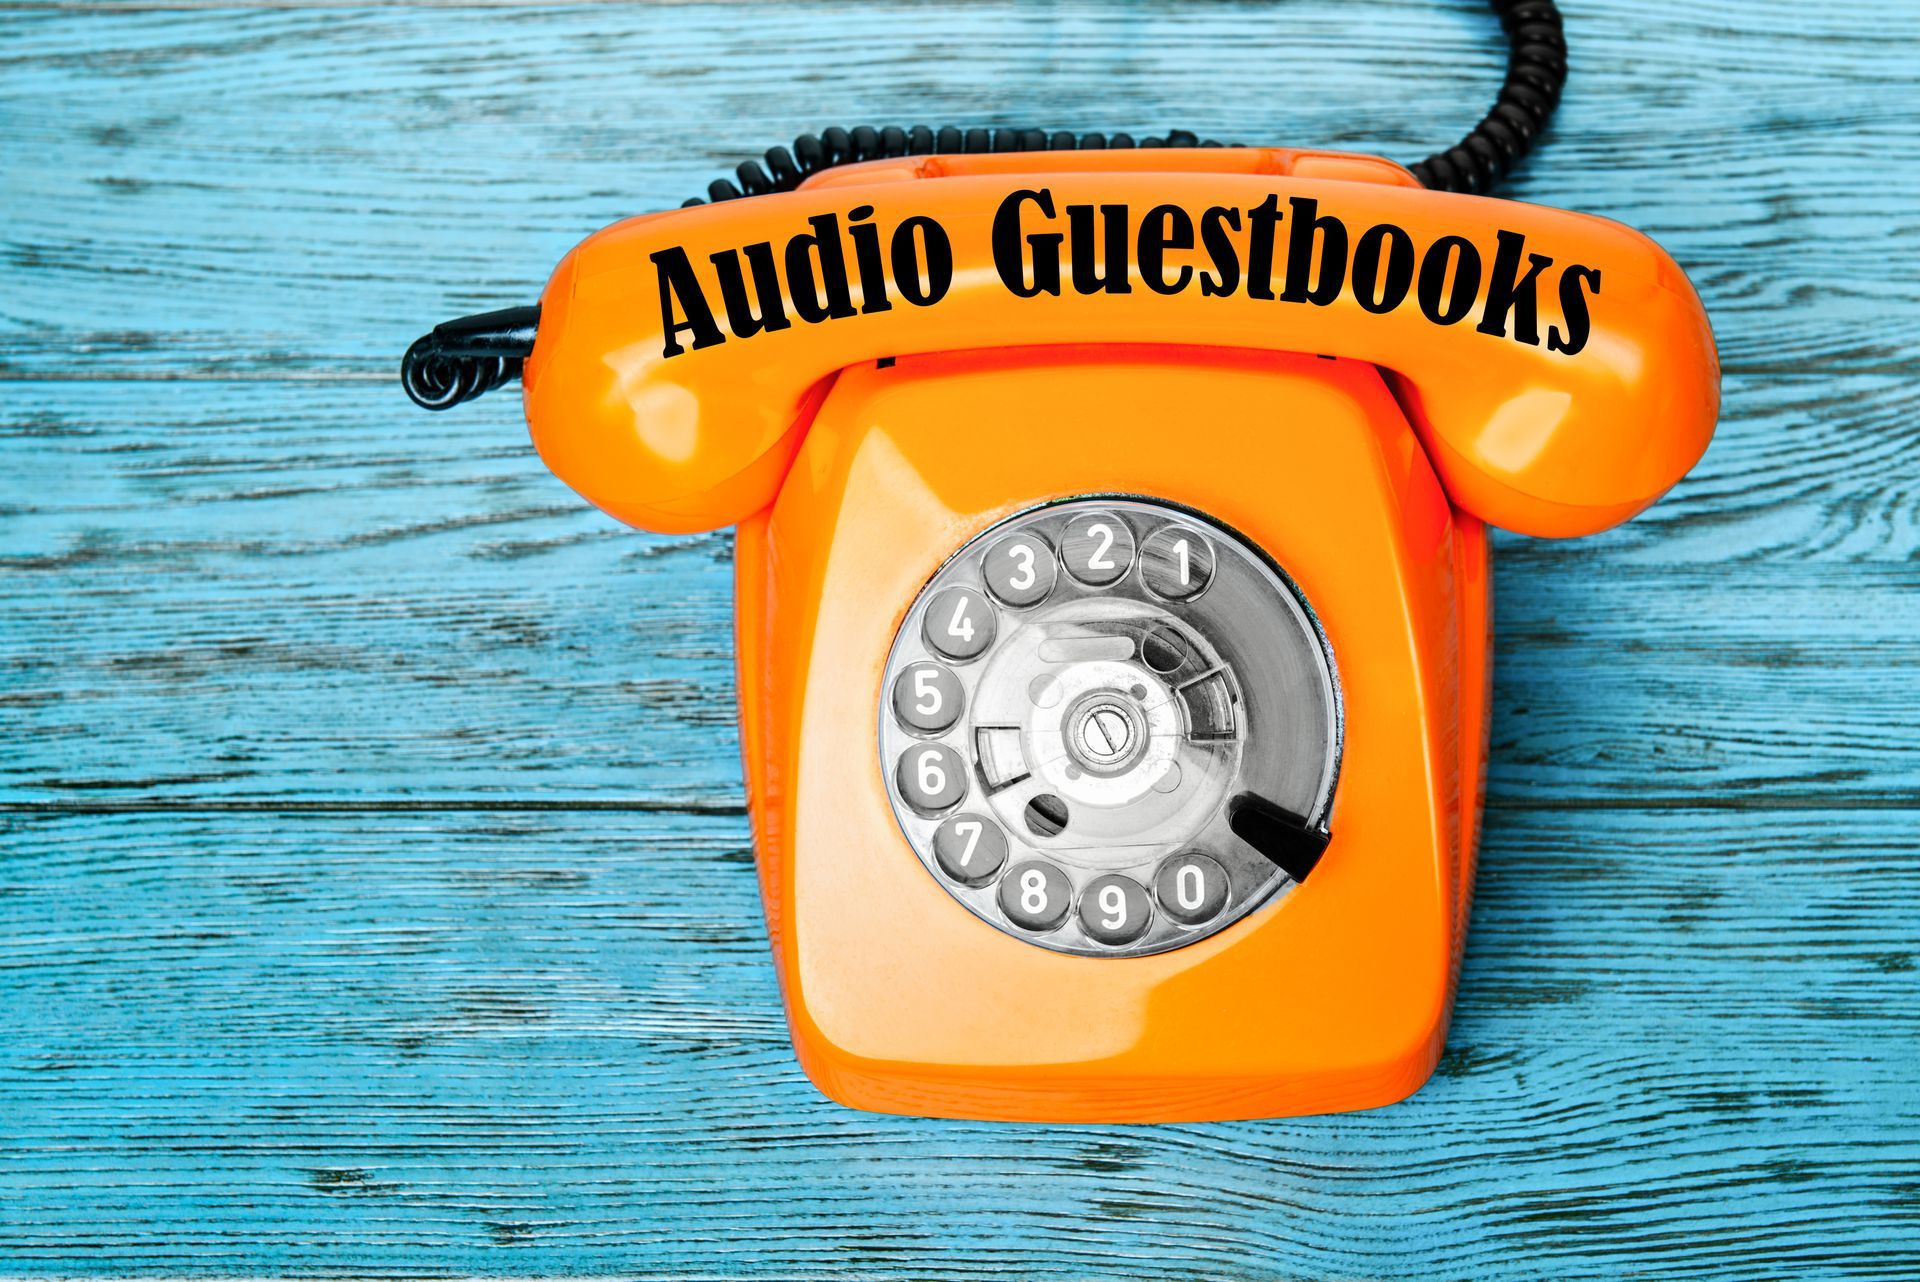 What is an Audio Guestbook